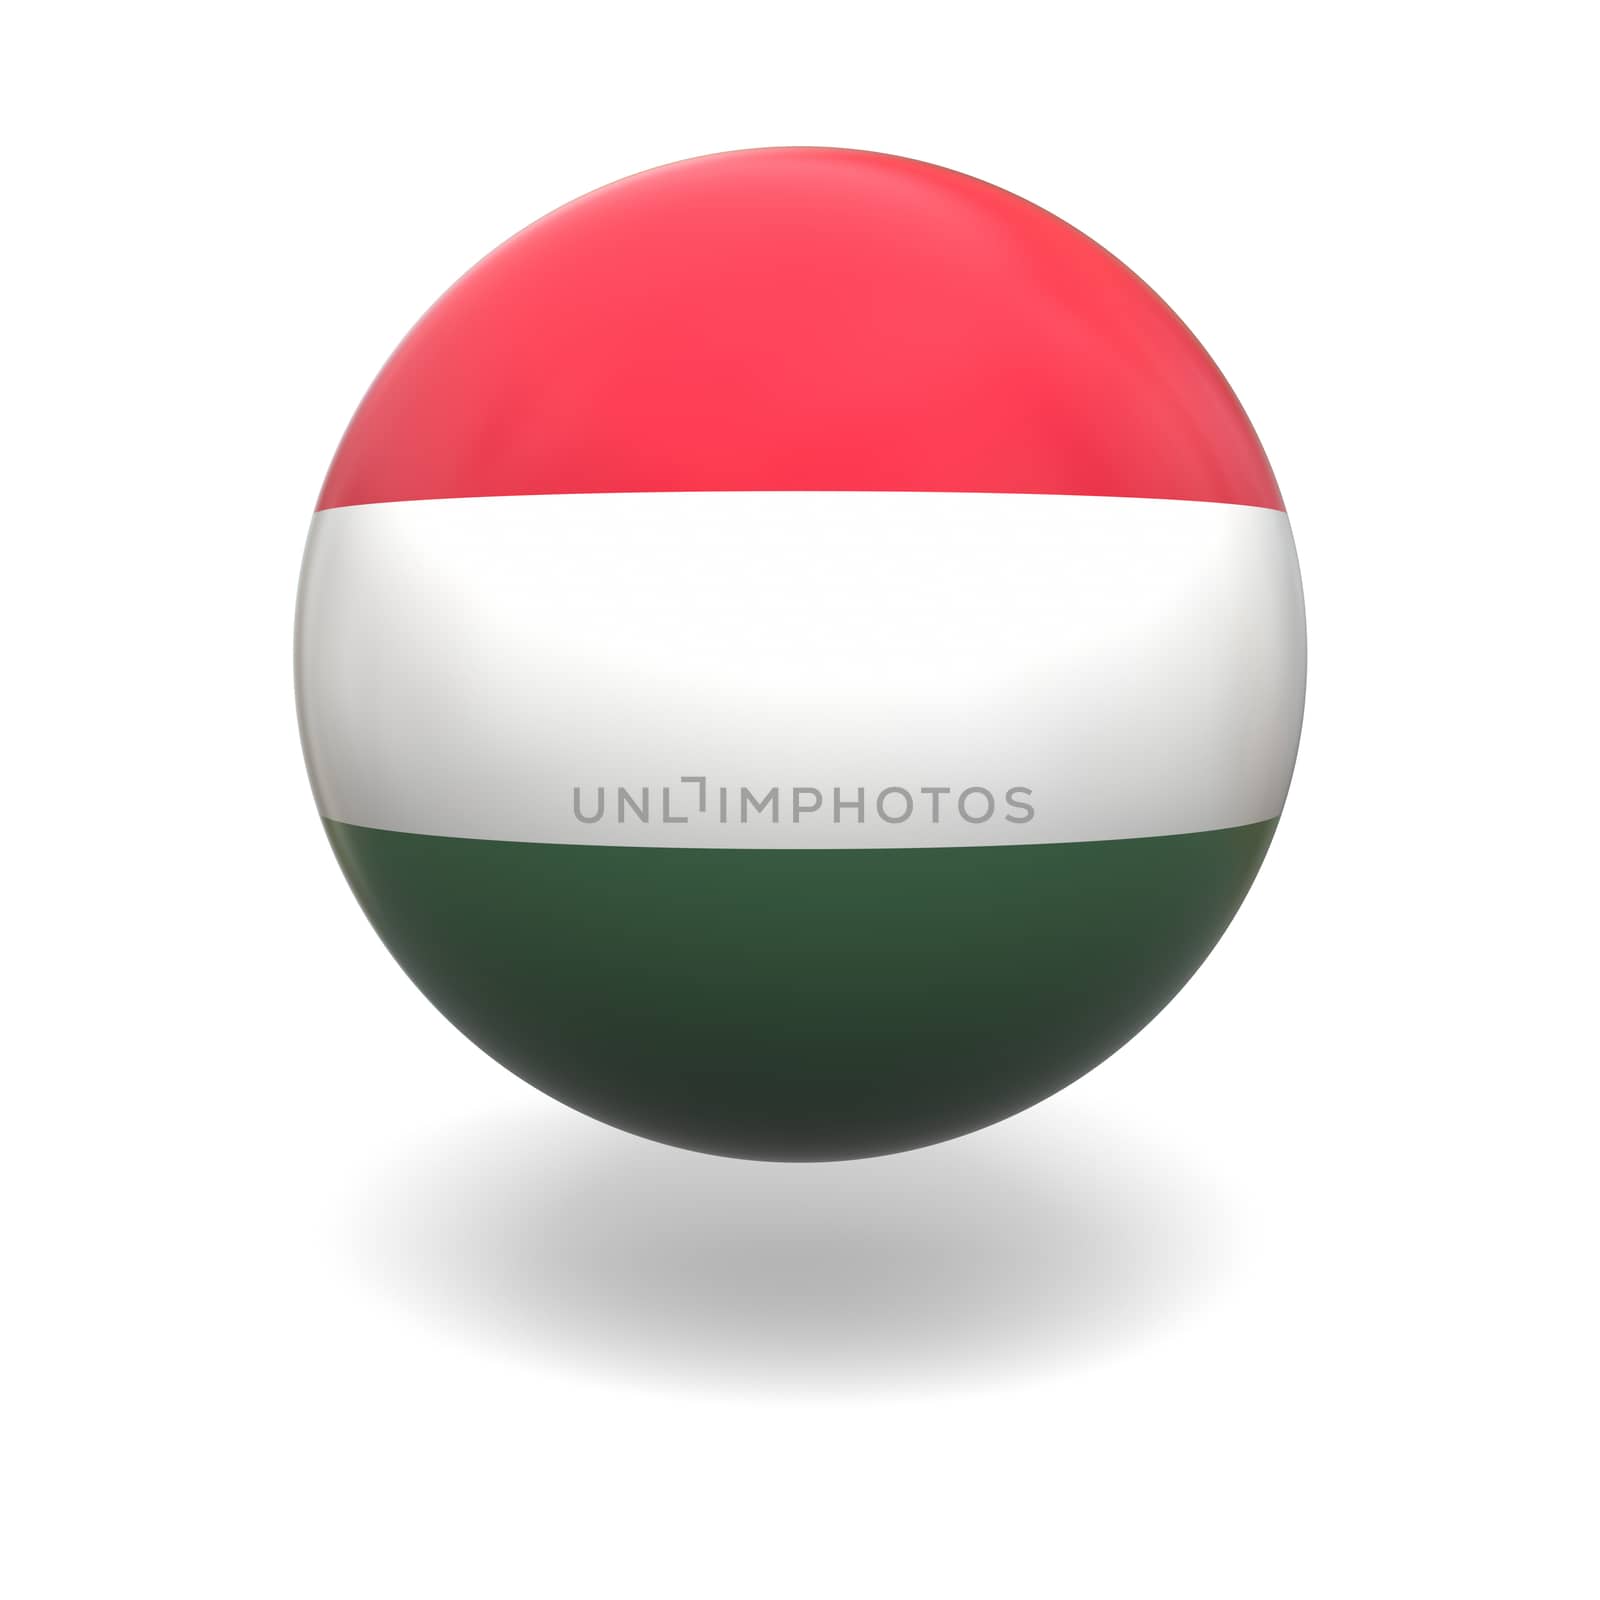 National flag of Hungary on sphere isolated on white background